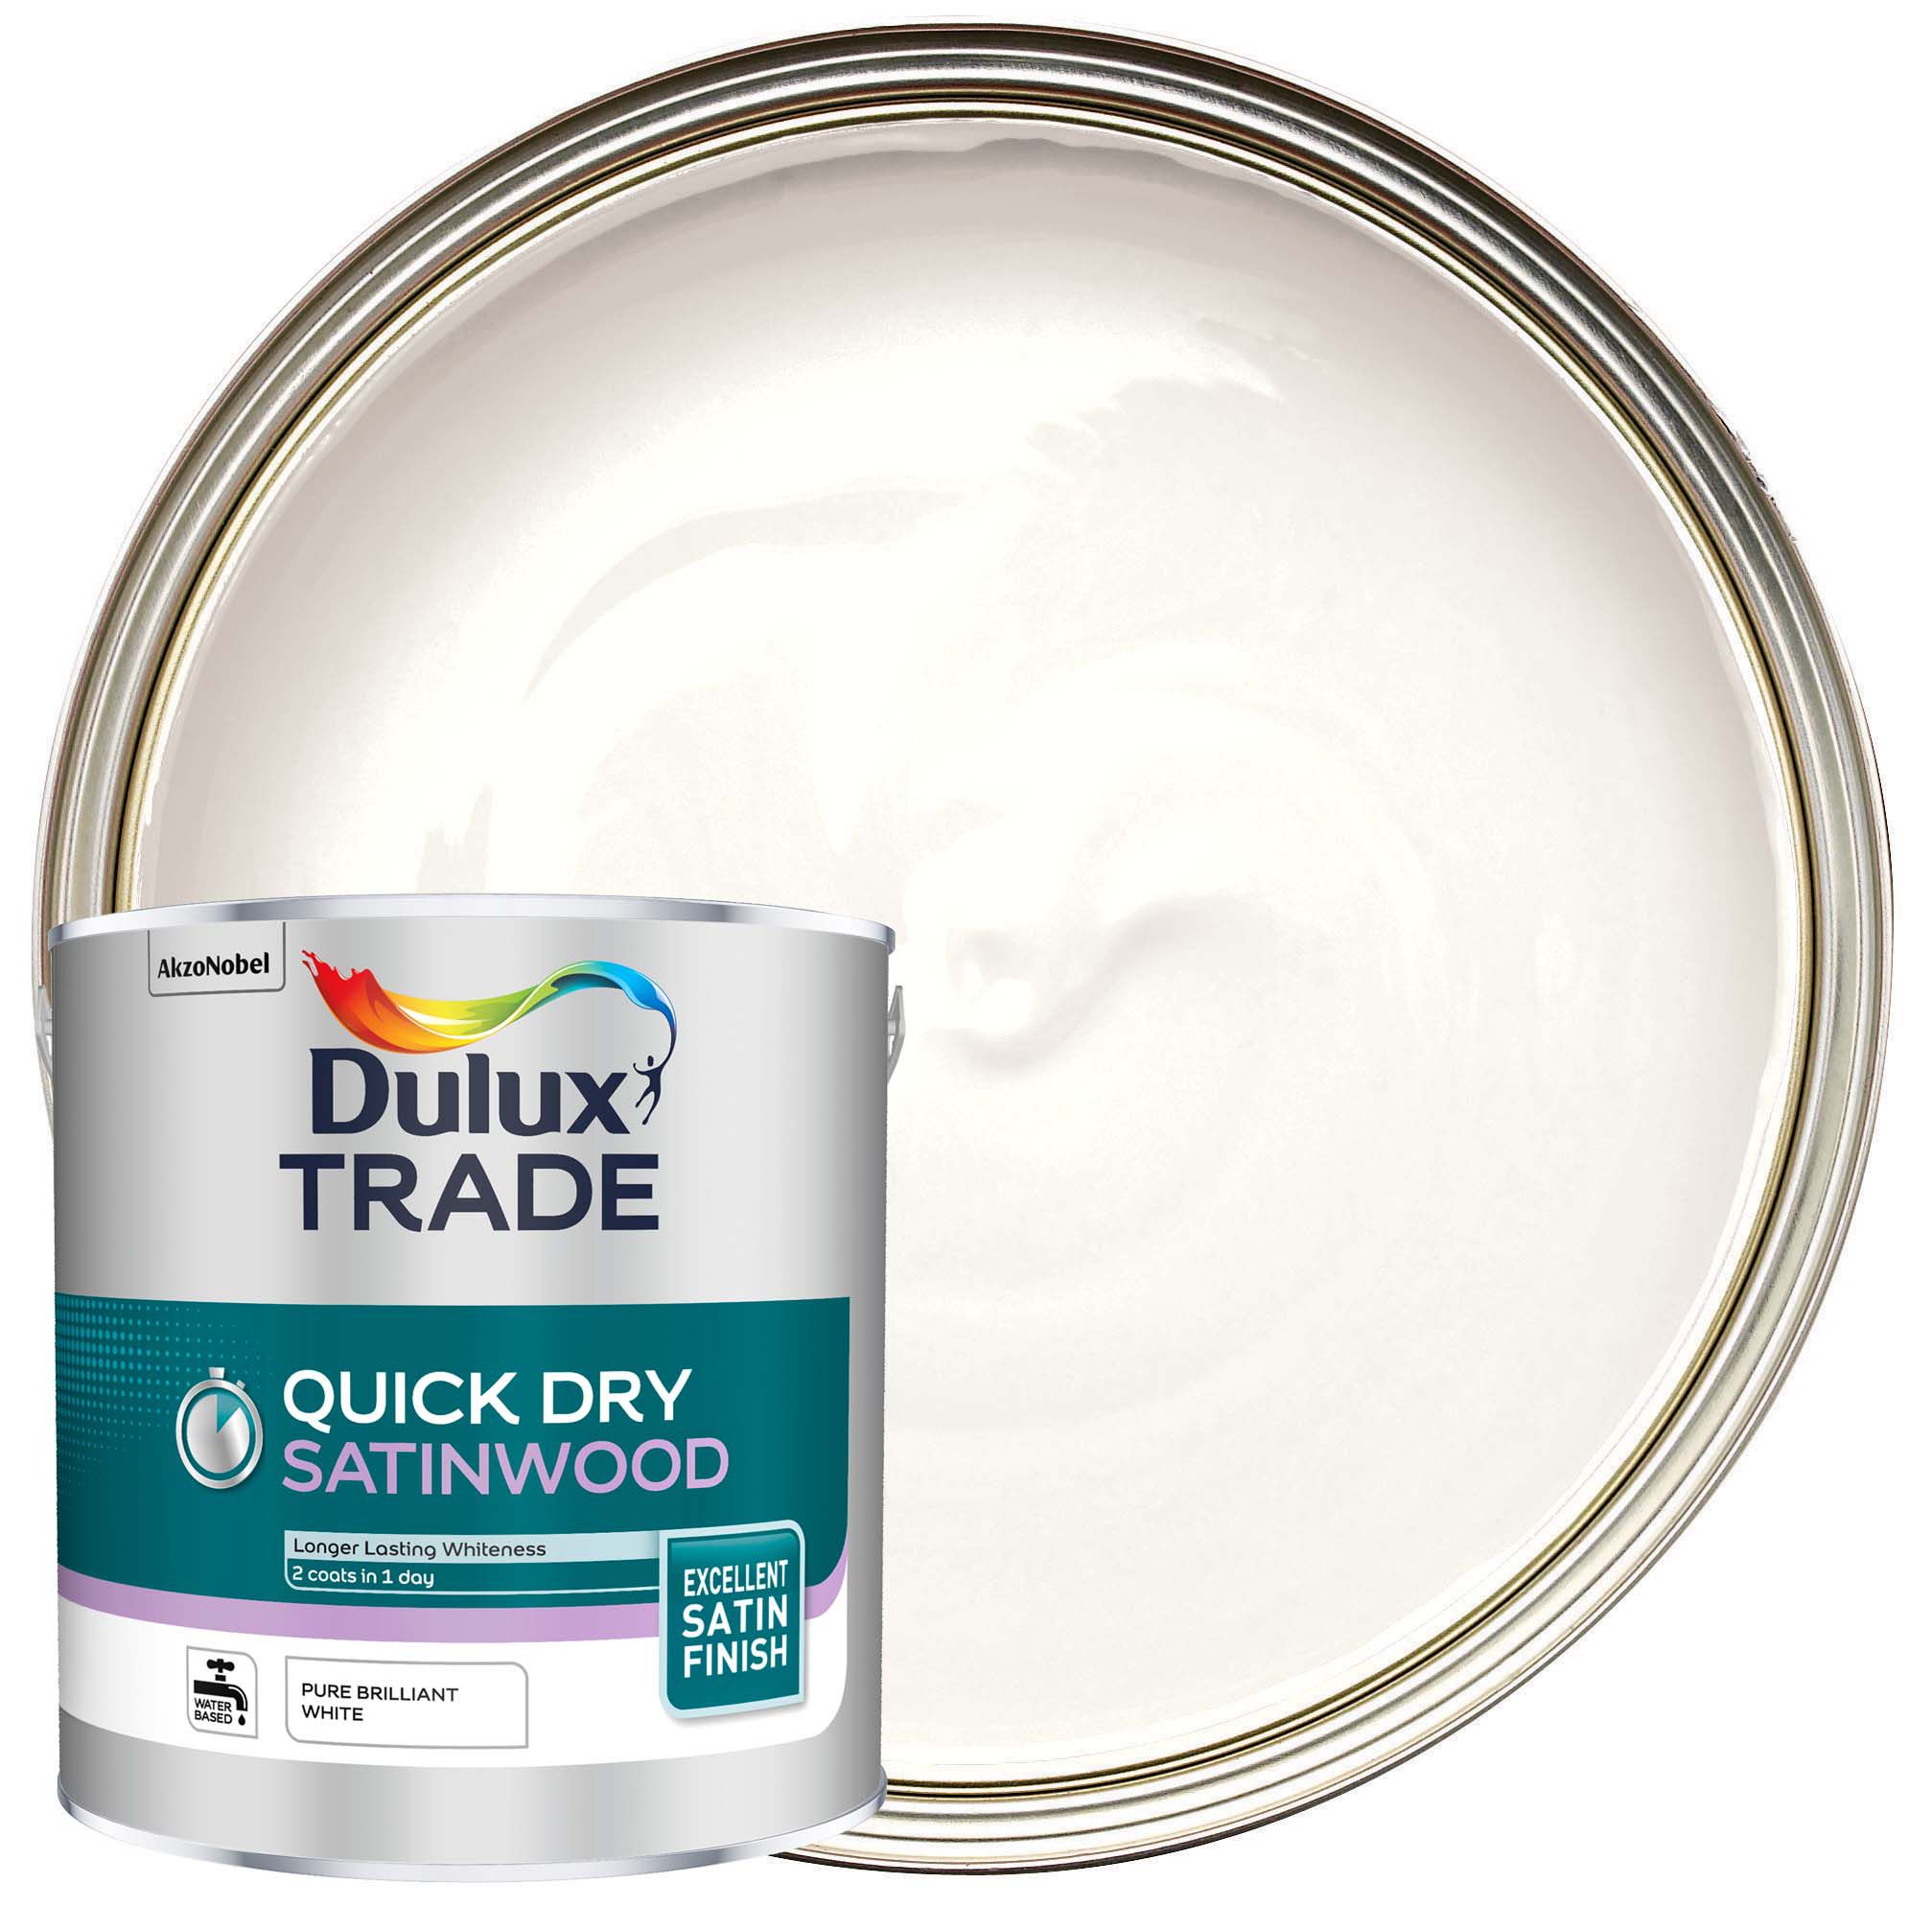 Image of Dulux Trade Quick Dry Satinwood Pure Brilliant White 2.5L